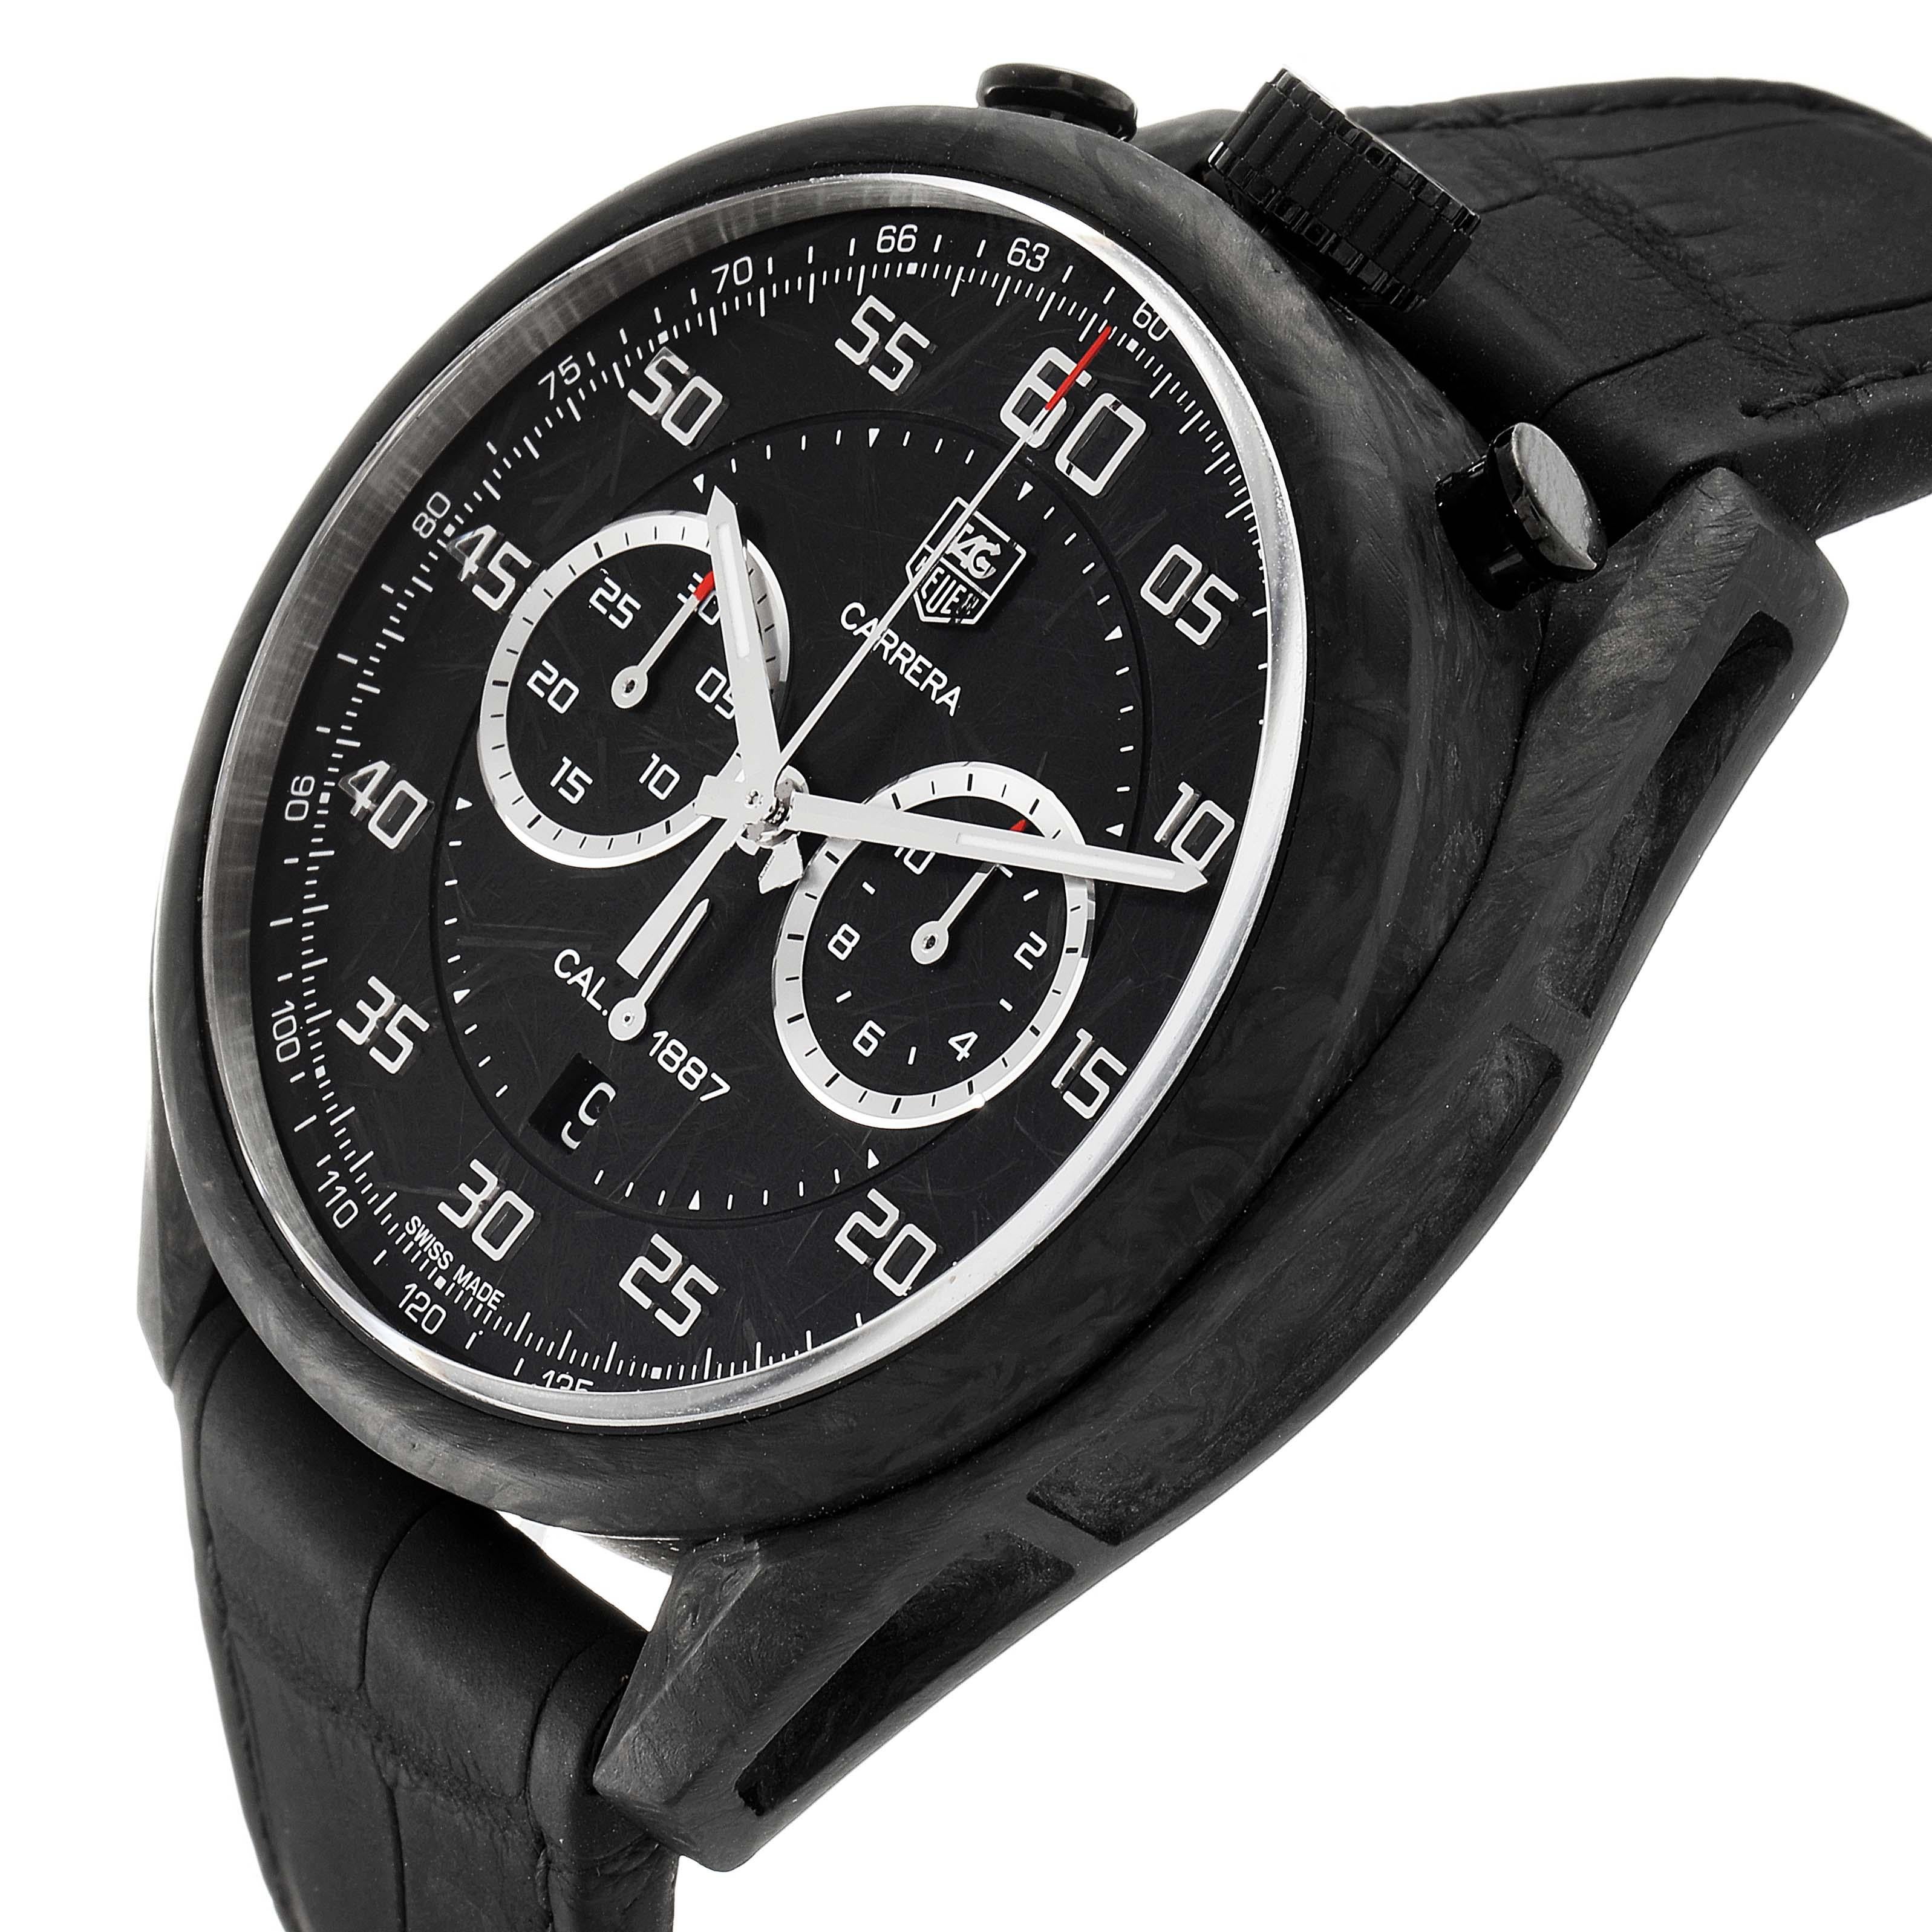 Tag Heuer Carrera Chronograph Grey Dial Carbon Mens Watch CAR2C90 In Excellent Condition For Sale In Atlanta, GA